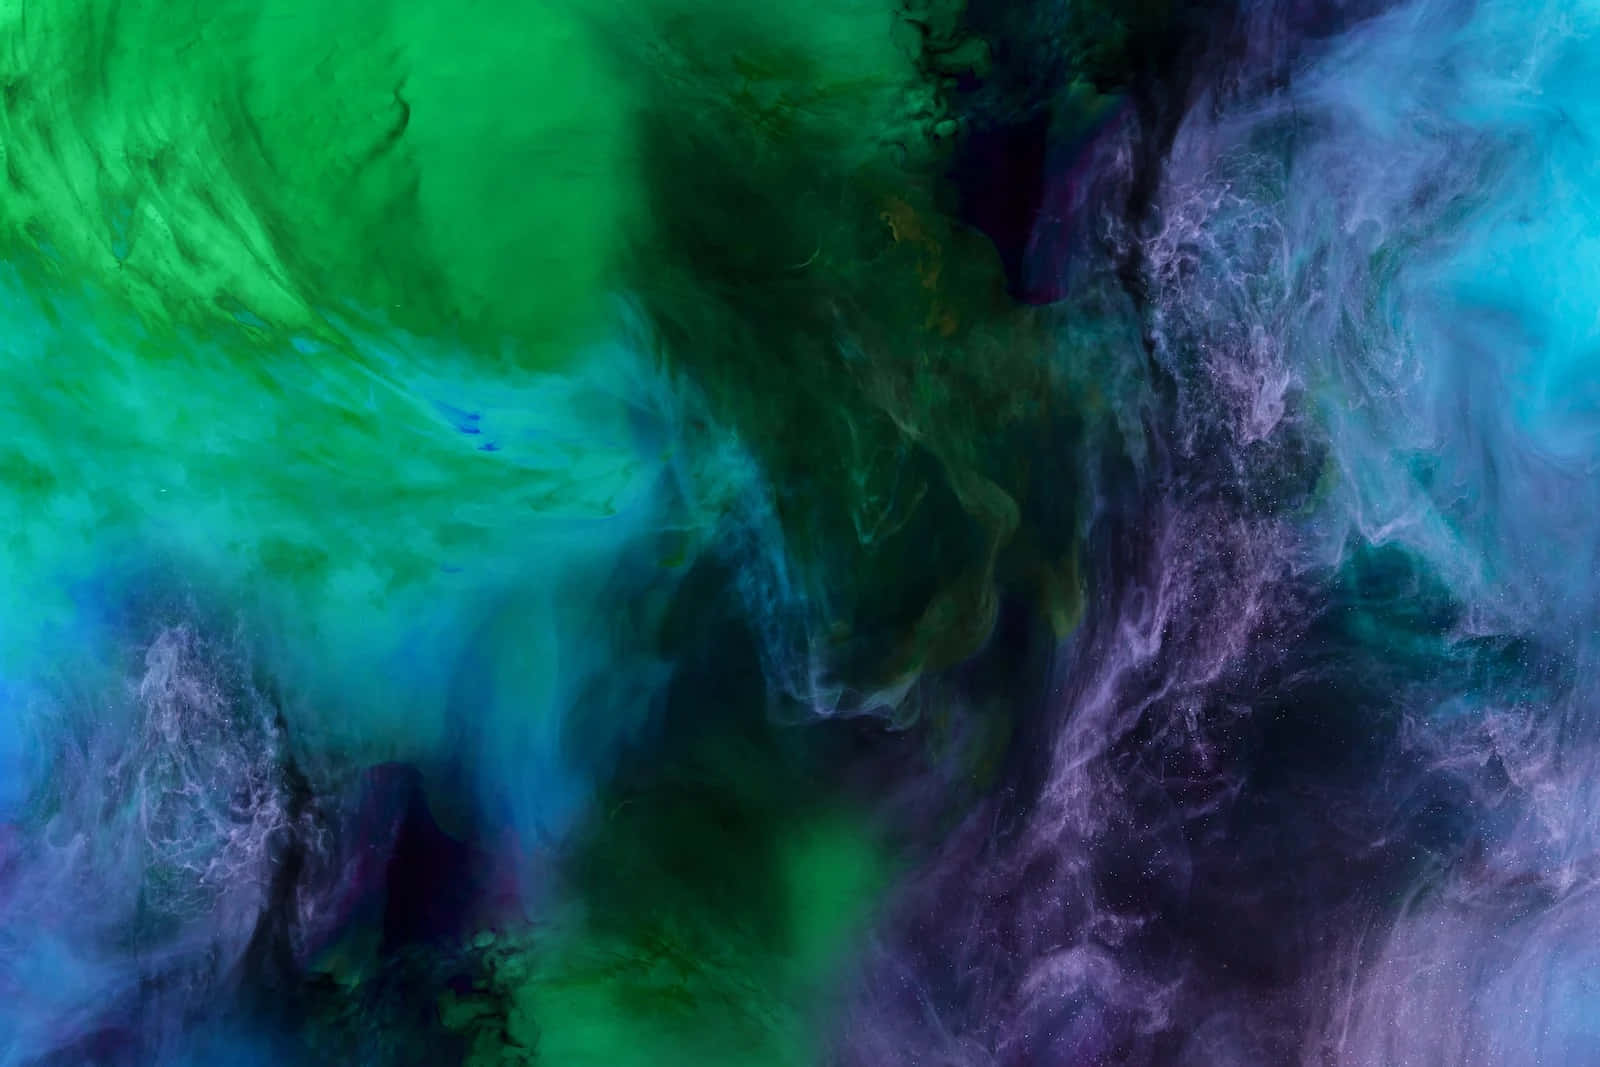 Abstract Painting Of Green, Blue And Purple Colors